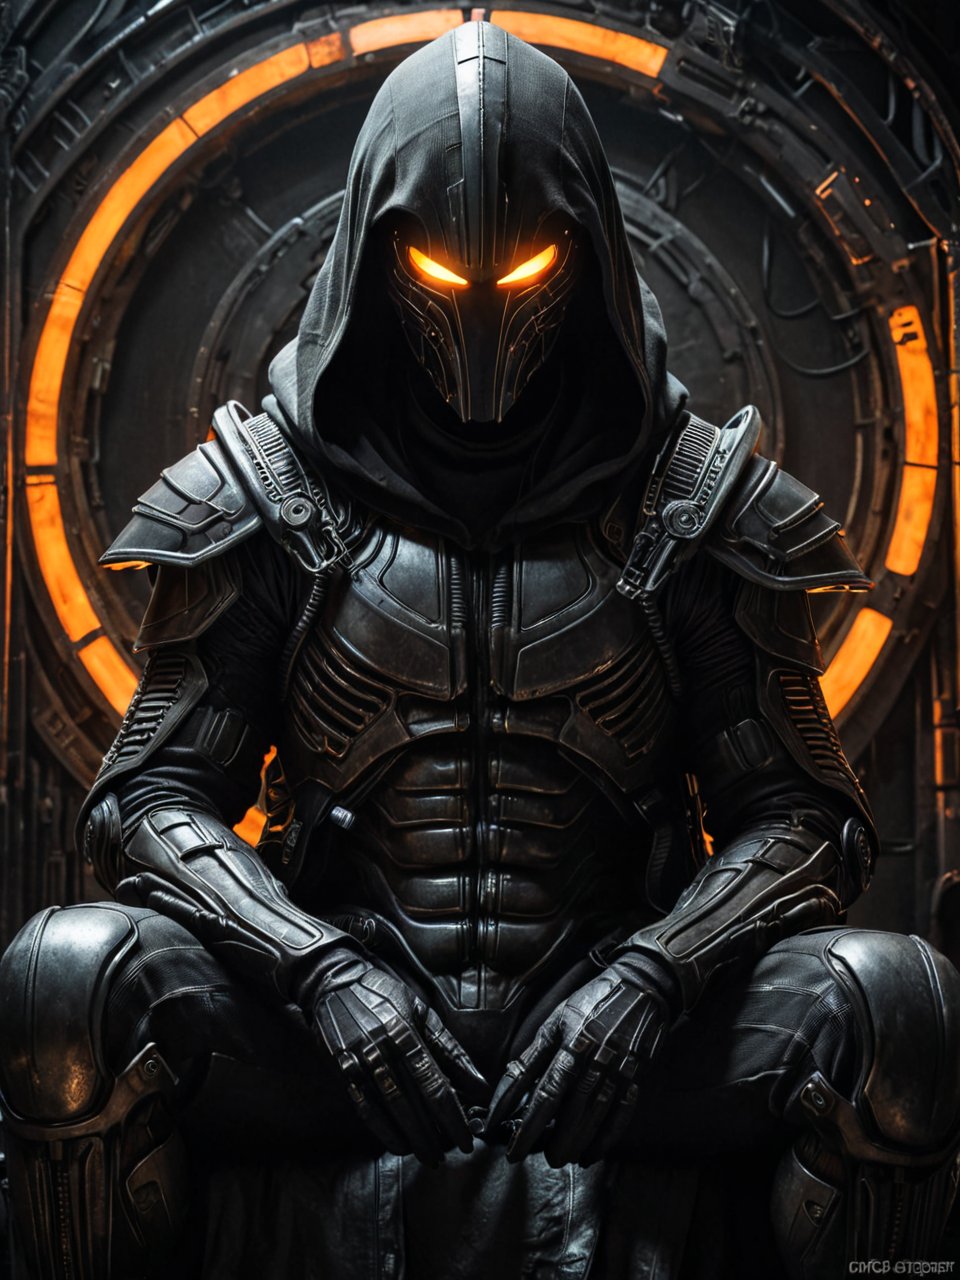 futuristic warrior cloaked in shadow with glowing orange halo, seated and introspective, monochromatic sci-fi attire with utility gear, hood concealing face, dark and gritty, cyberpunk art style, dramatic light and shadow, 25-35 years old, humanoid, textured and detailed, inspired by h.r. giger, masterpiece,